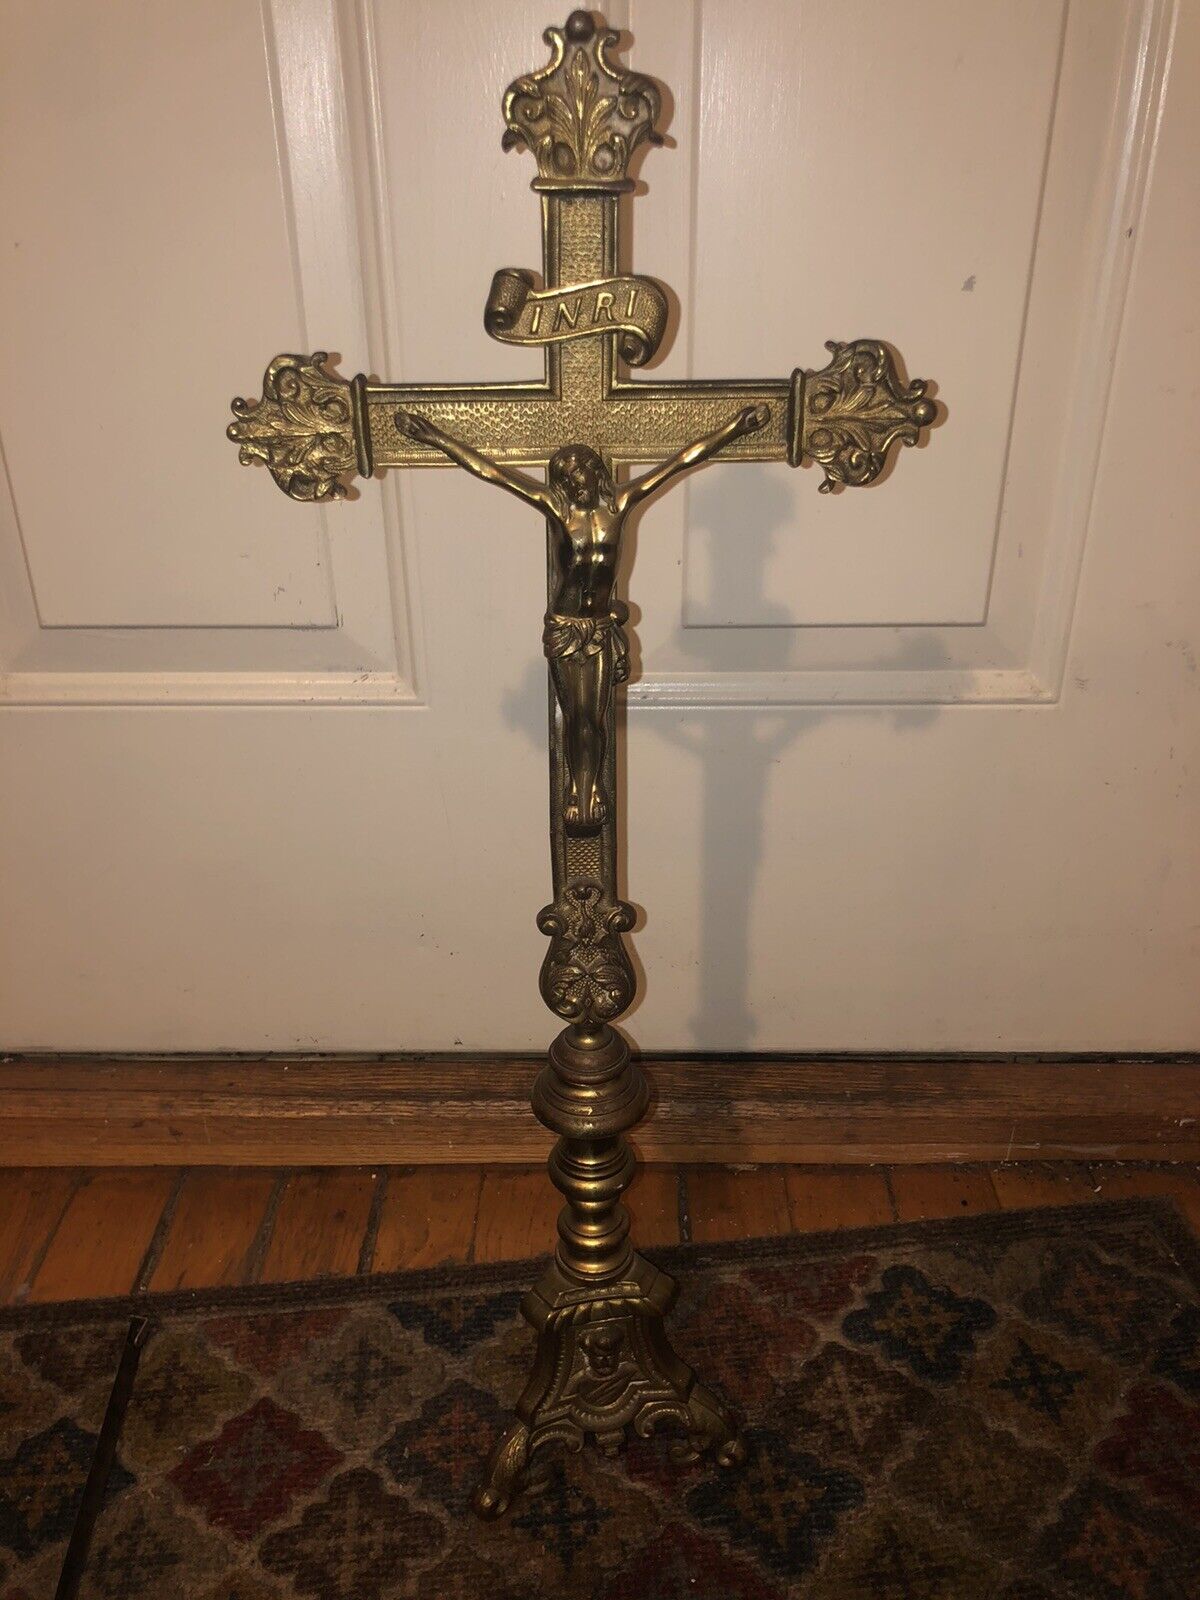 Antique French Gothic Revival INRI Brass Alter Standing Crucifix 19th Century